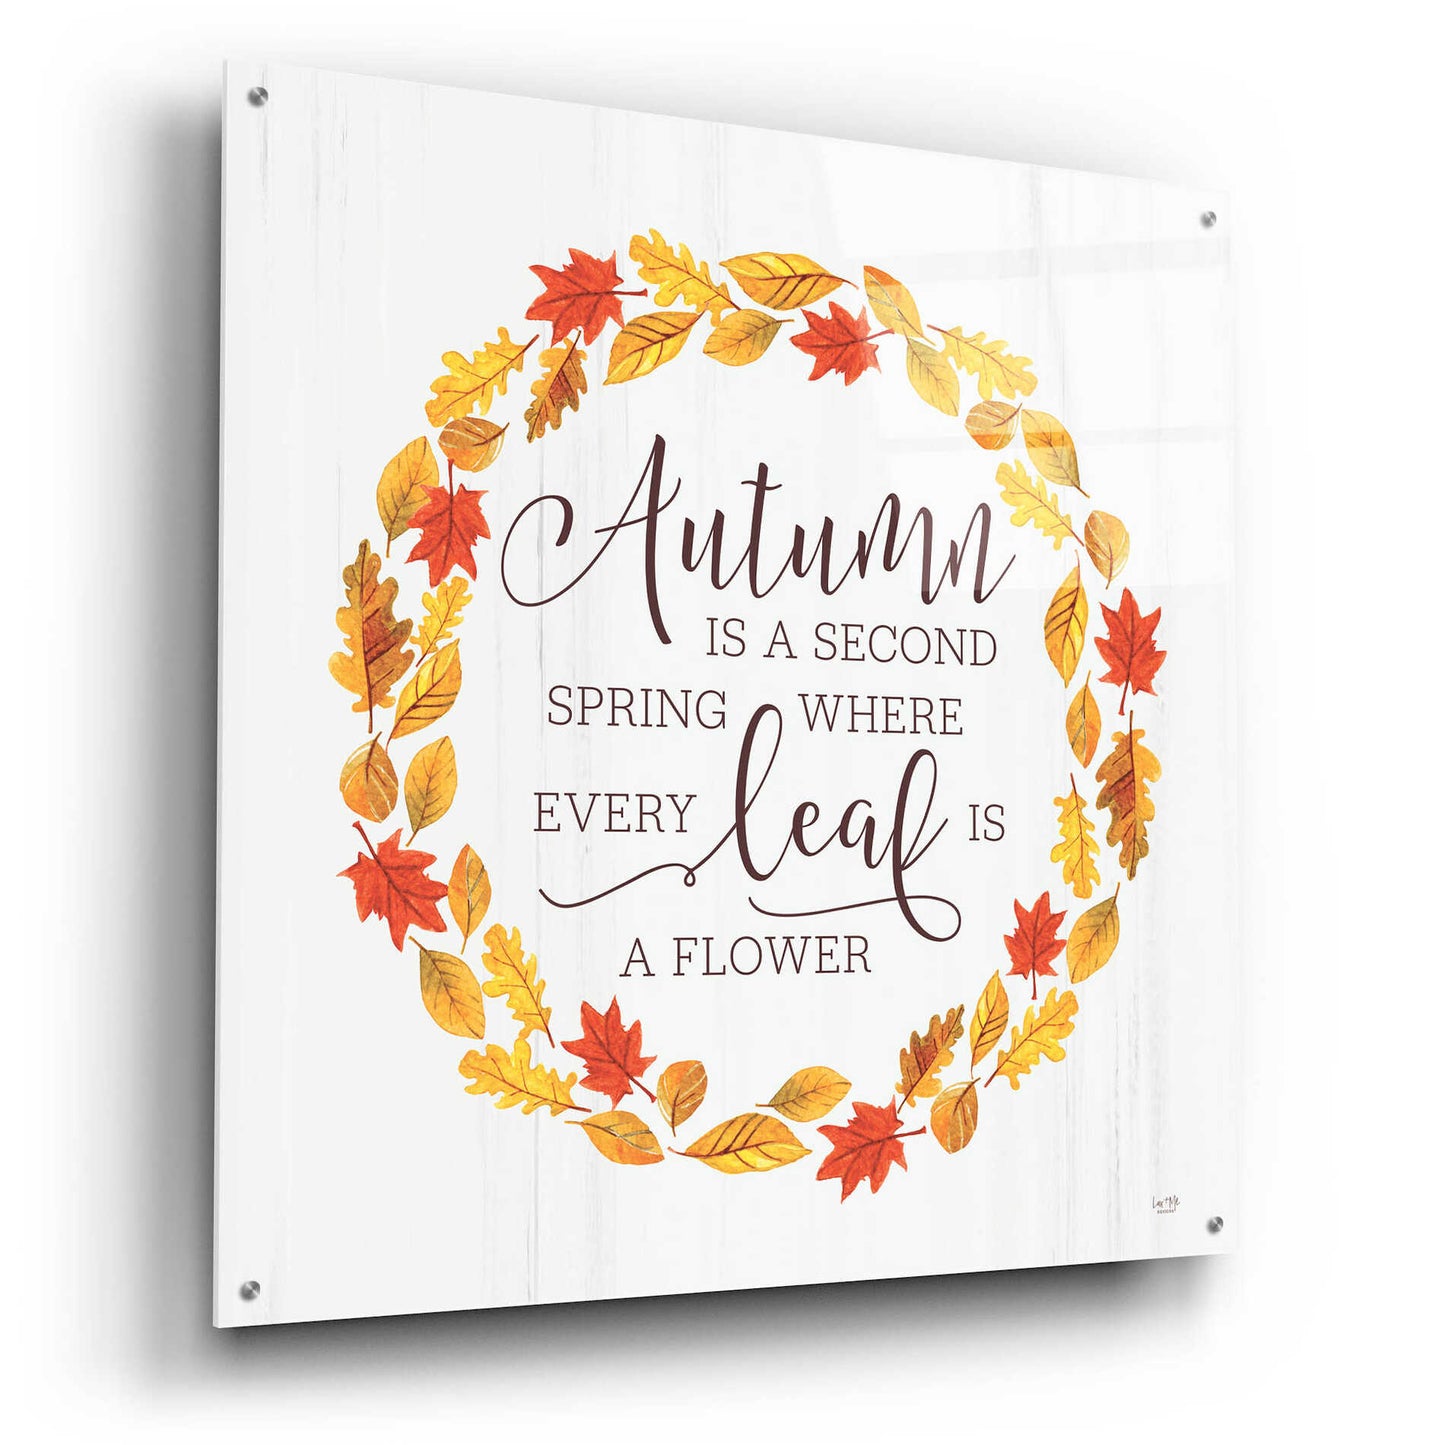 Epic Art 'Autumn is a Second Spring' by Lux + Me Designs, Acrylic Glass Wall Art,36x36